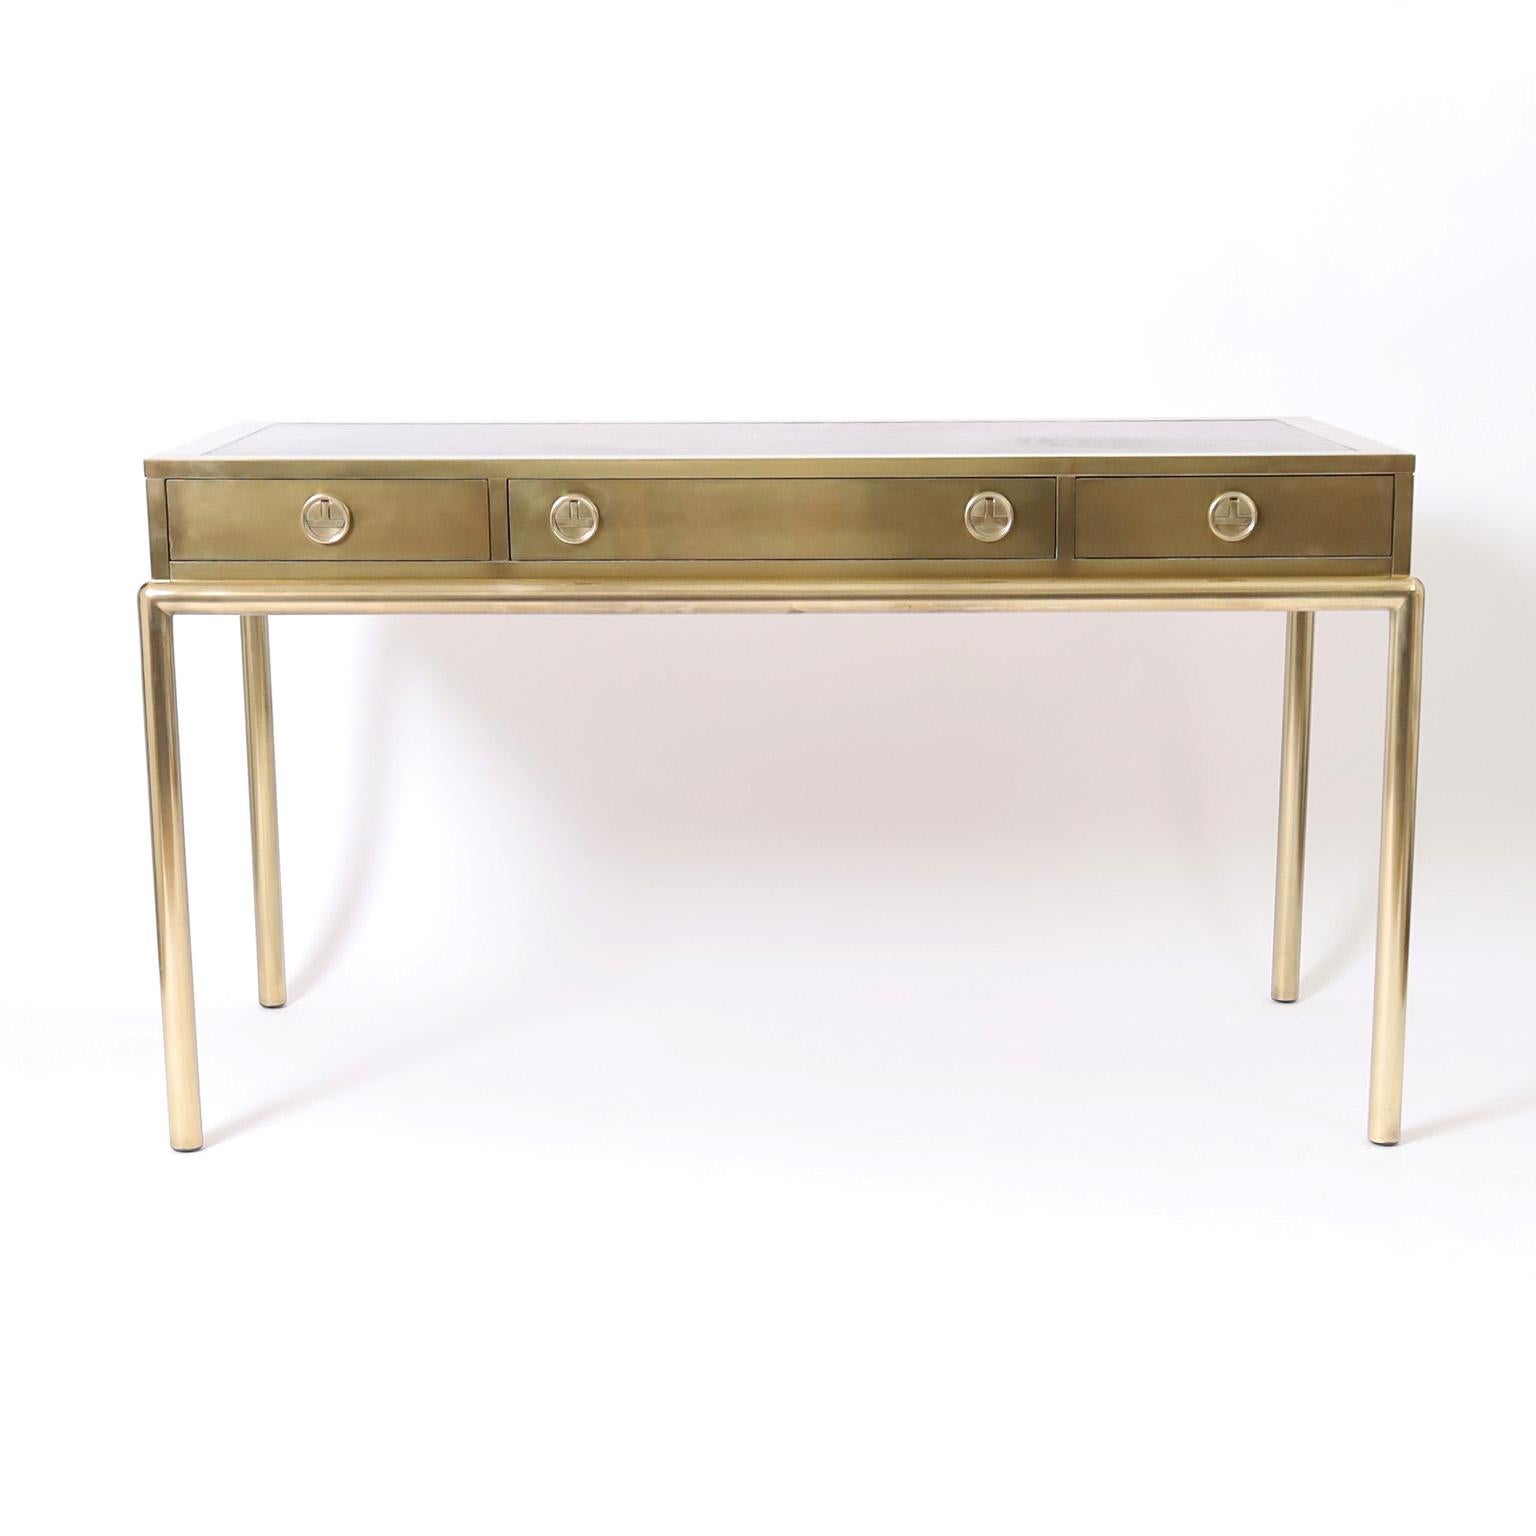 Mid century Mastercraft three drawer desk or writing table crafted in brass with an acid washed finish featuring a tooled leather top, stylized campaign drawer pulls, and a sleek modern design.